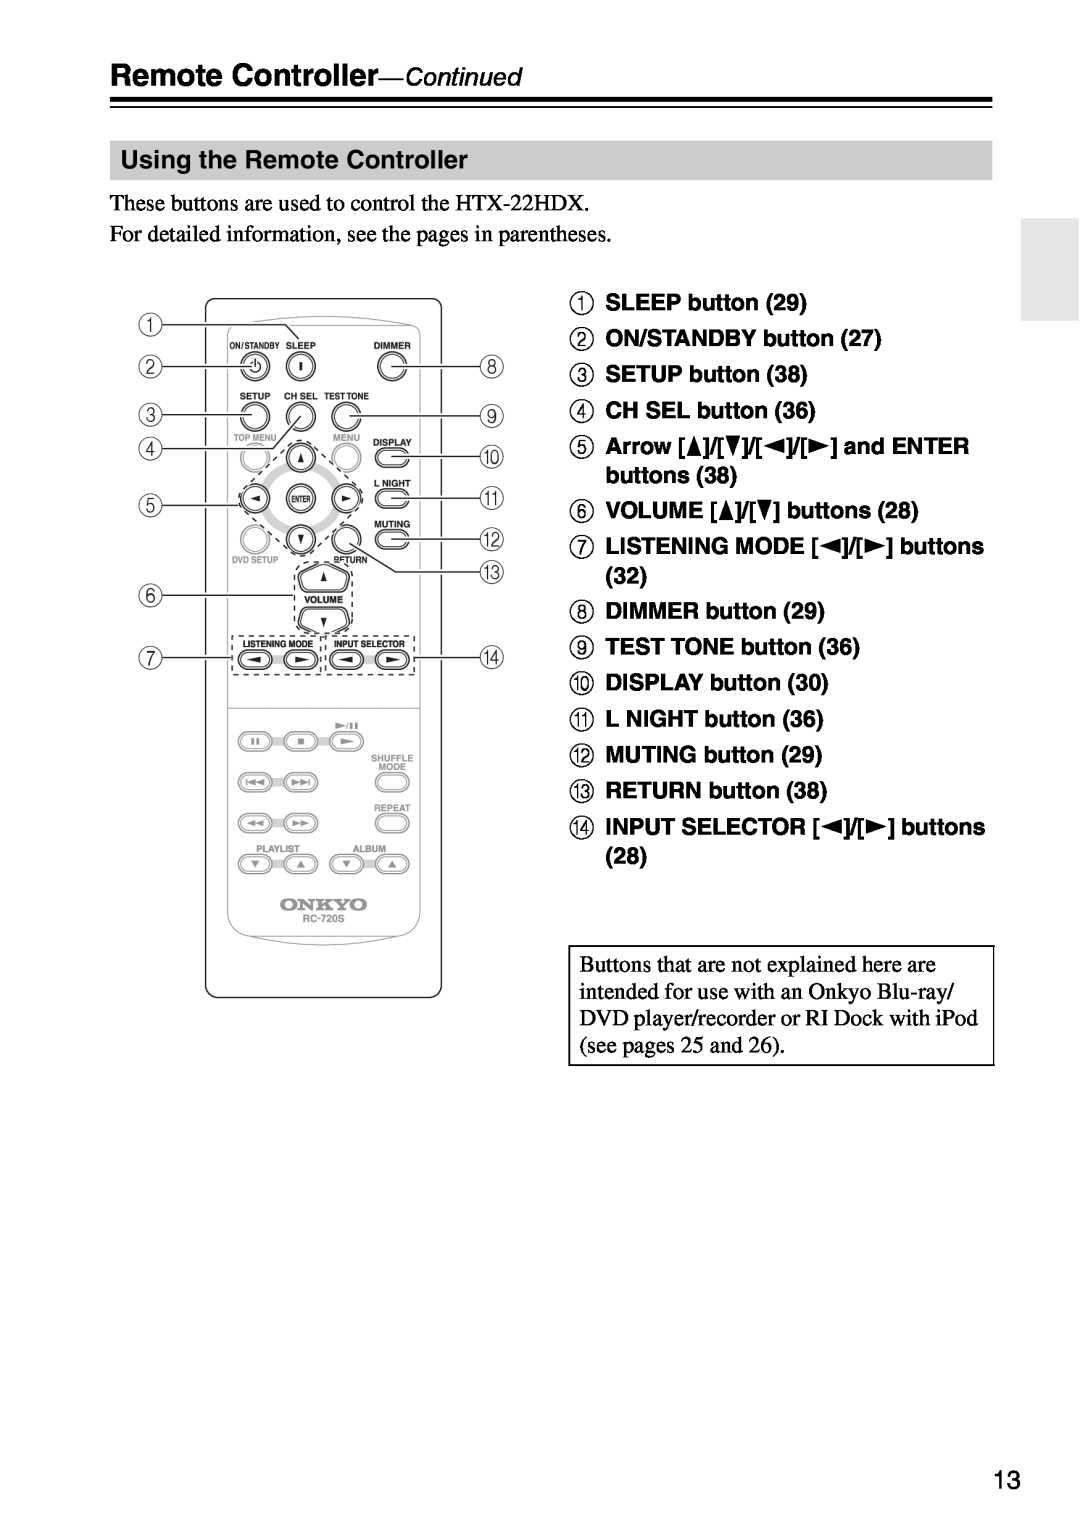 Onkyo HTX-22HDXPAW Remote Controller-Continued, Using the Remote Controller, id CH SEL button, kf VOLUME / buttons 